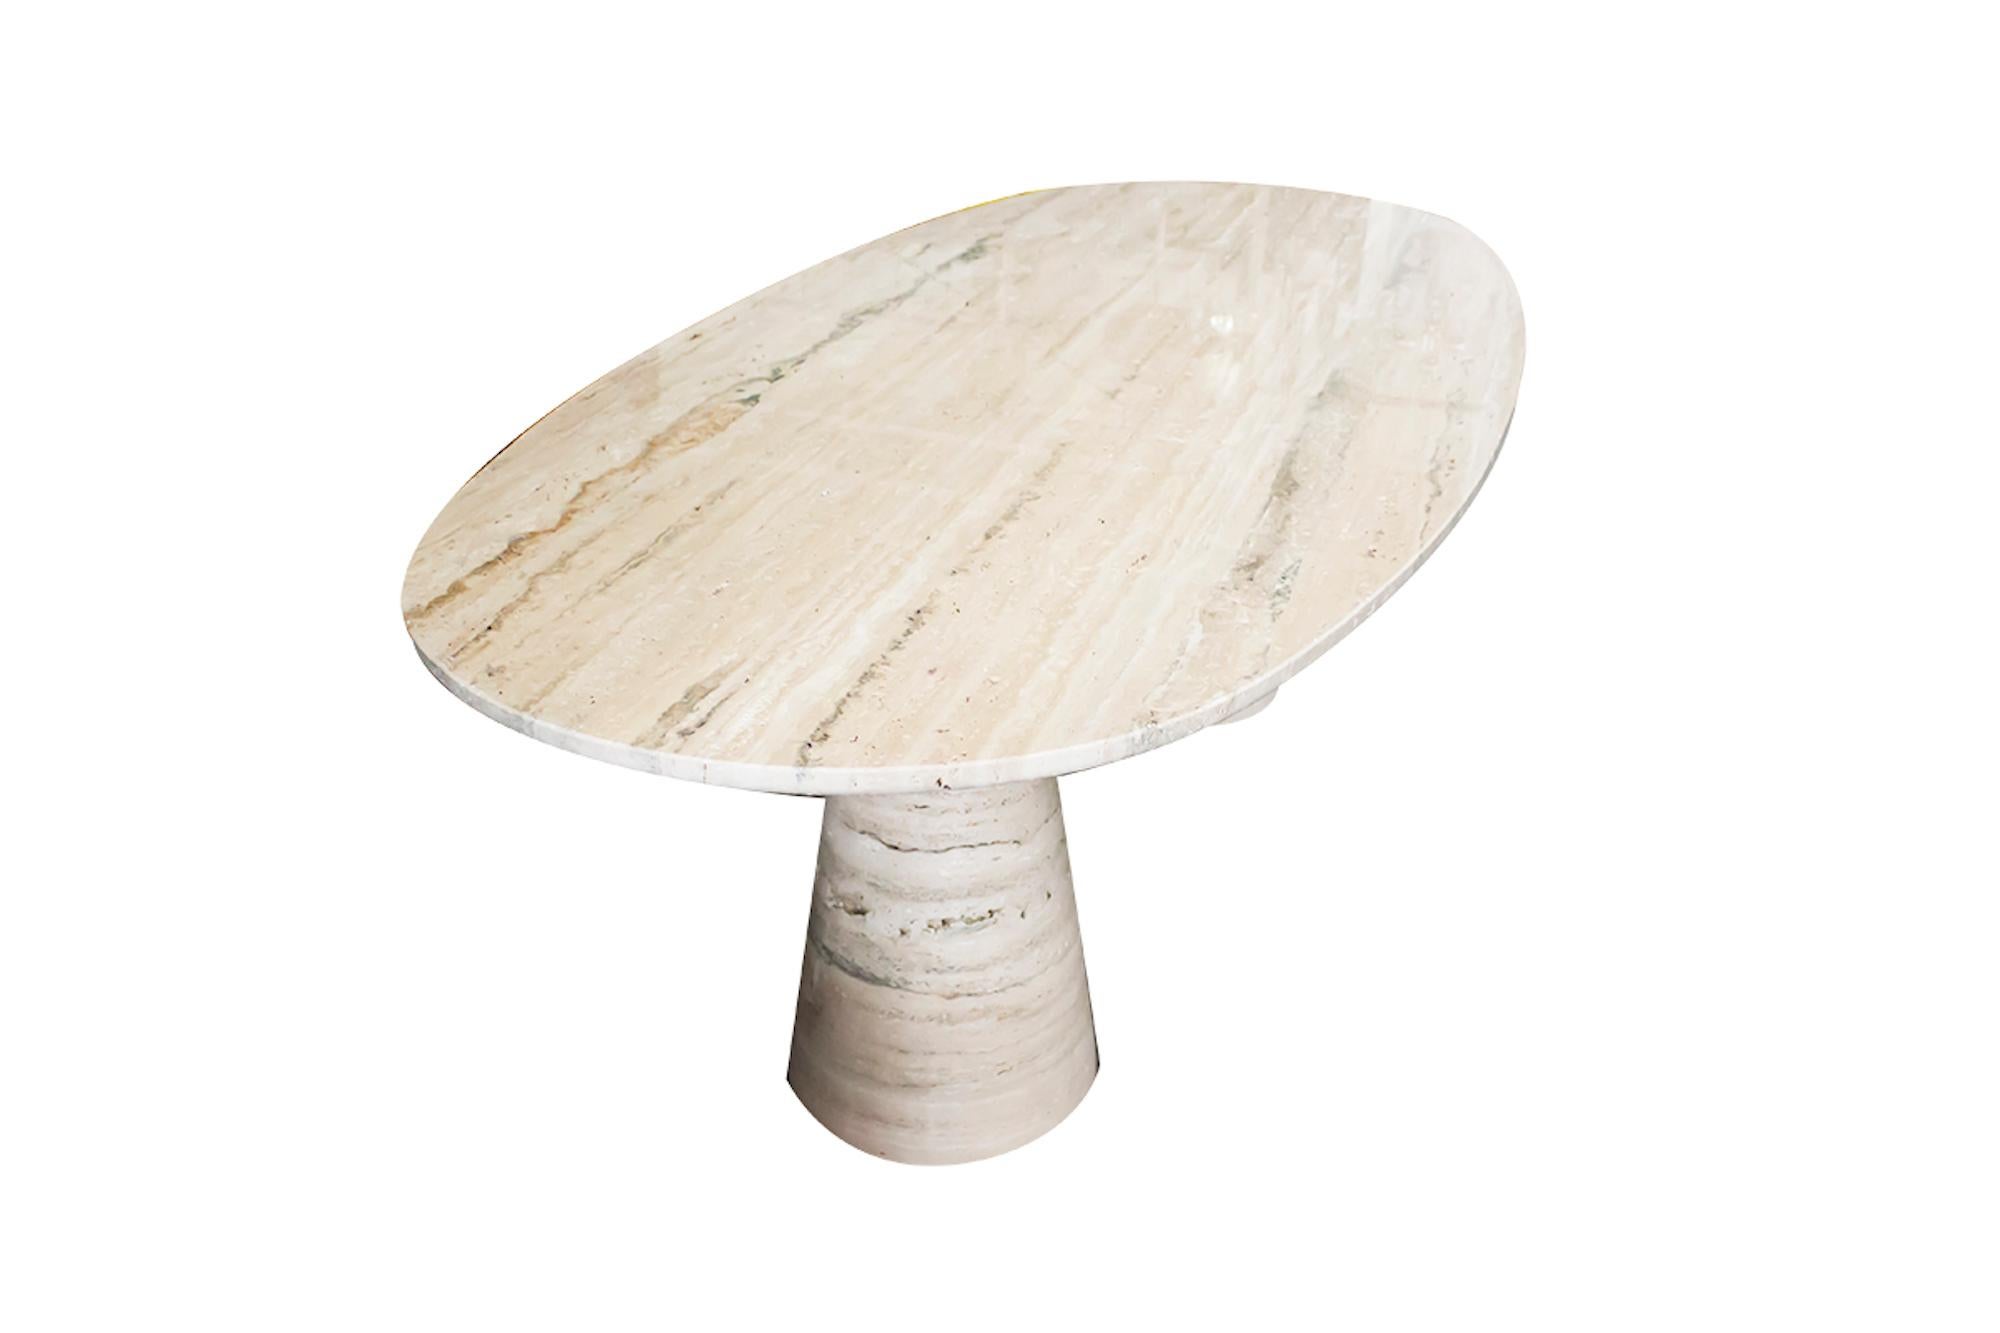 Bespoke Italian Travertine Oval Dining Table For Sale 2